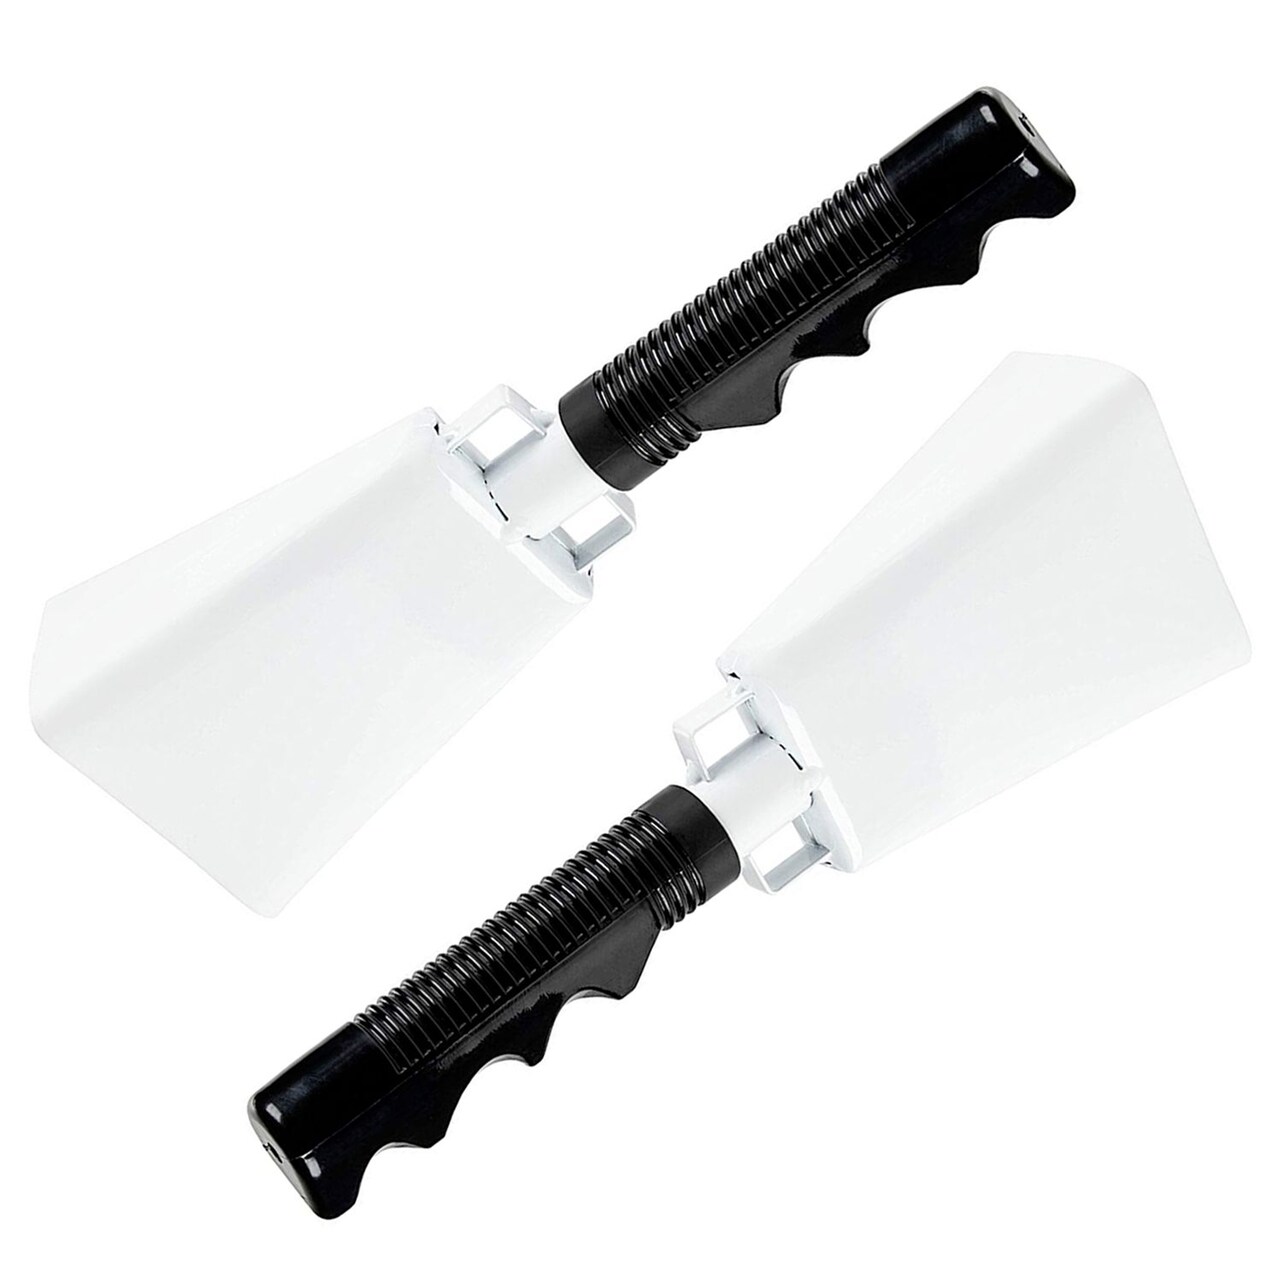 2 Pack 9-inch Cowbells for Sporting Events, Percussion Noise Makers with  Handle for Football Games, Stadiums (White)